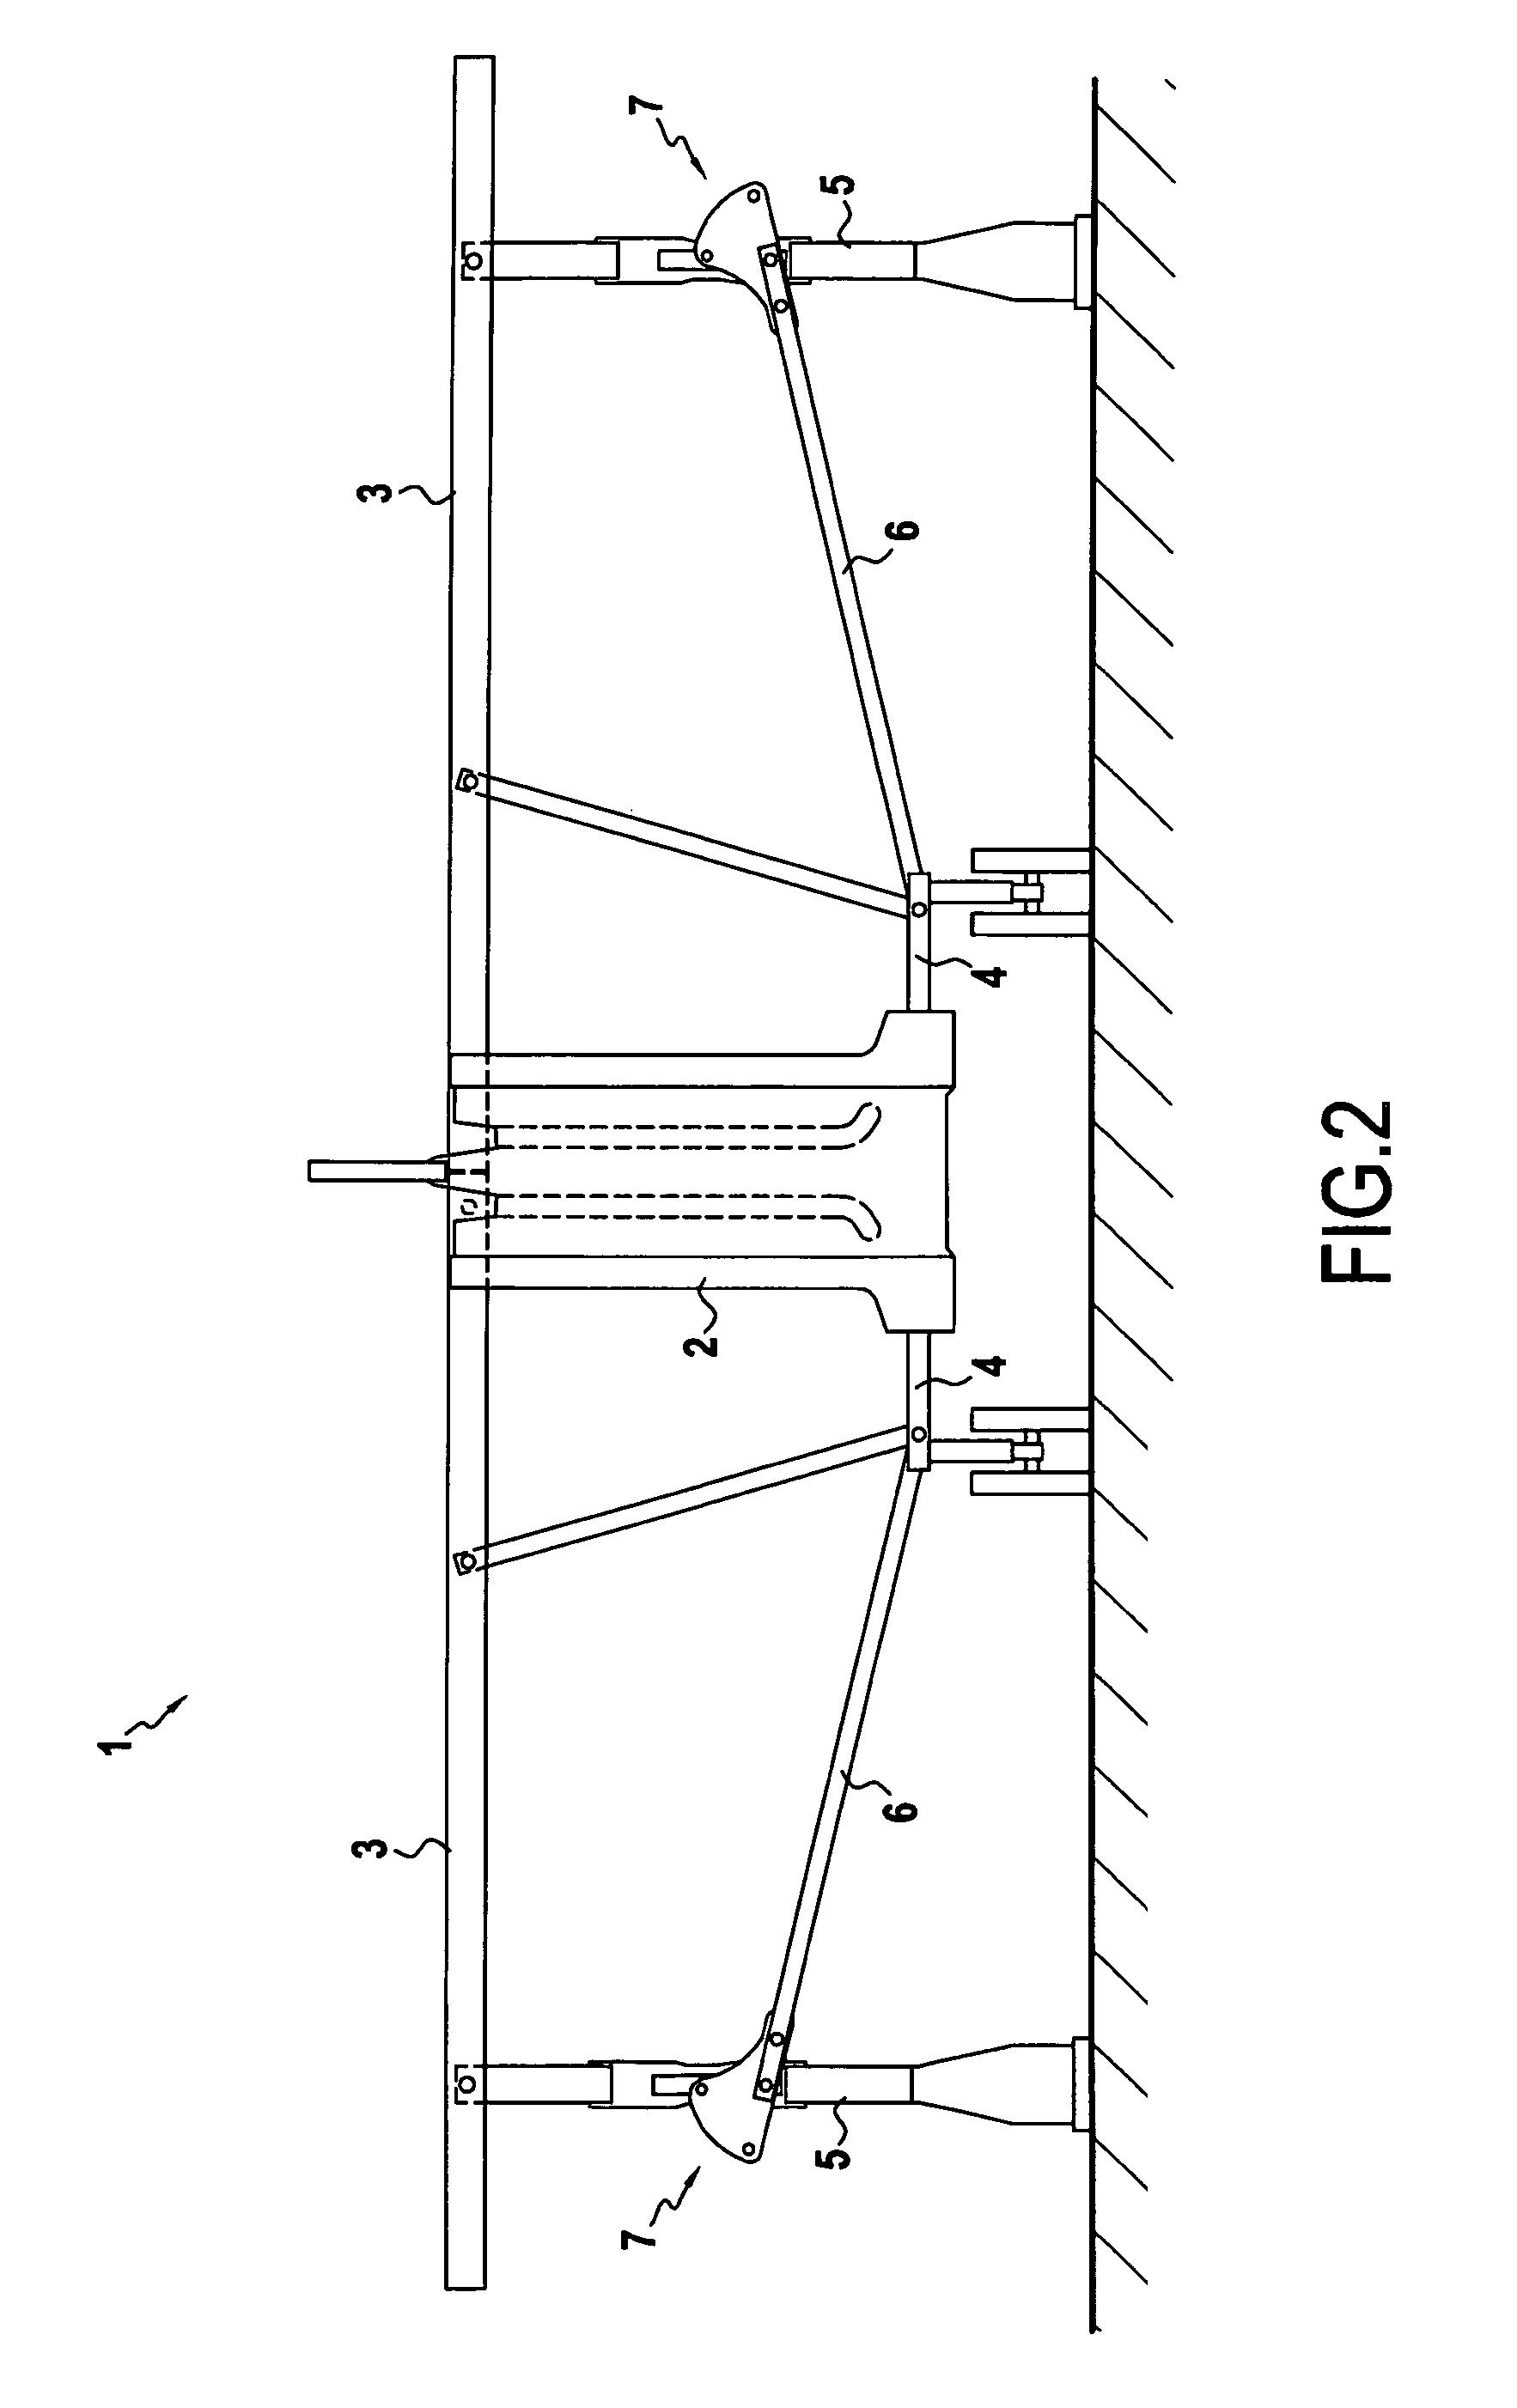 Ping-pong table/locking with an indexing finger